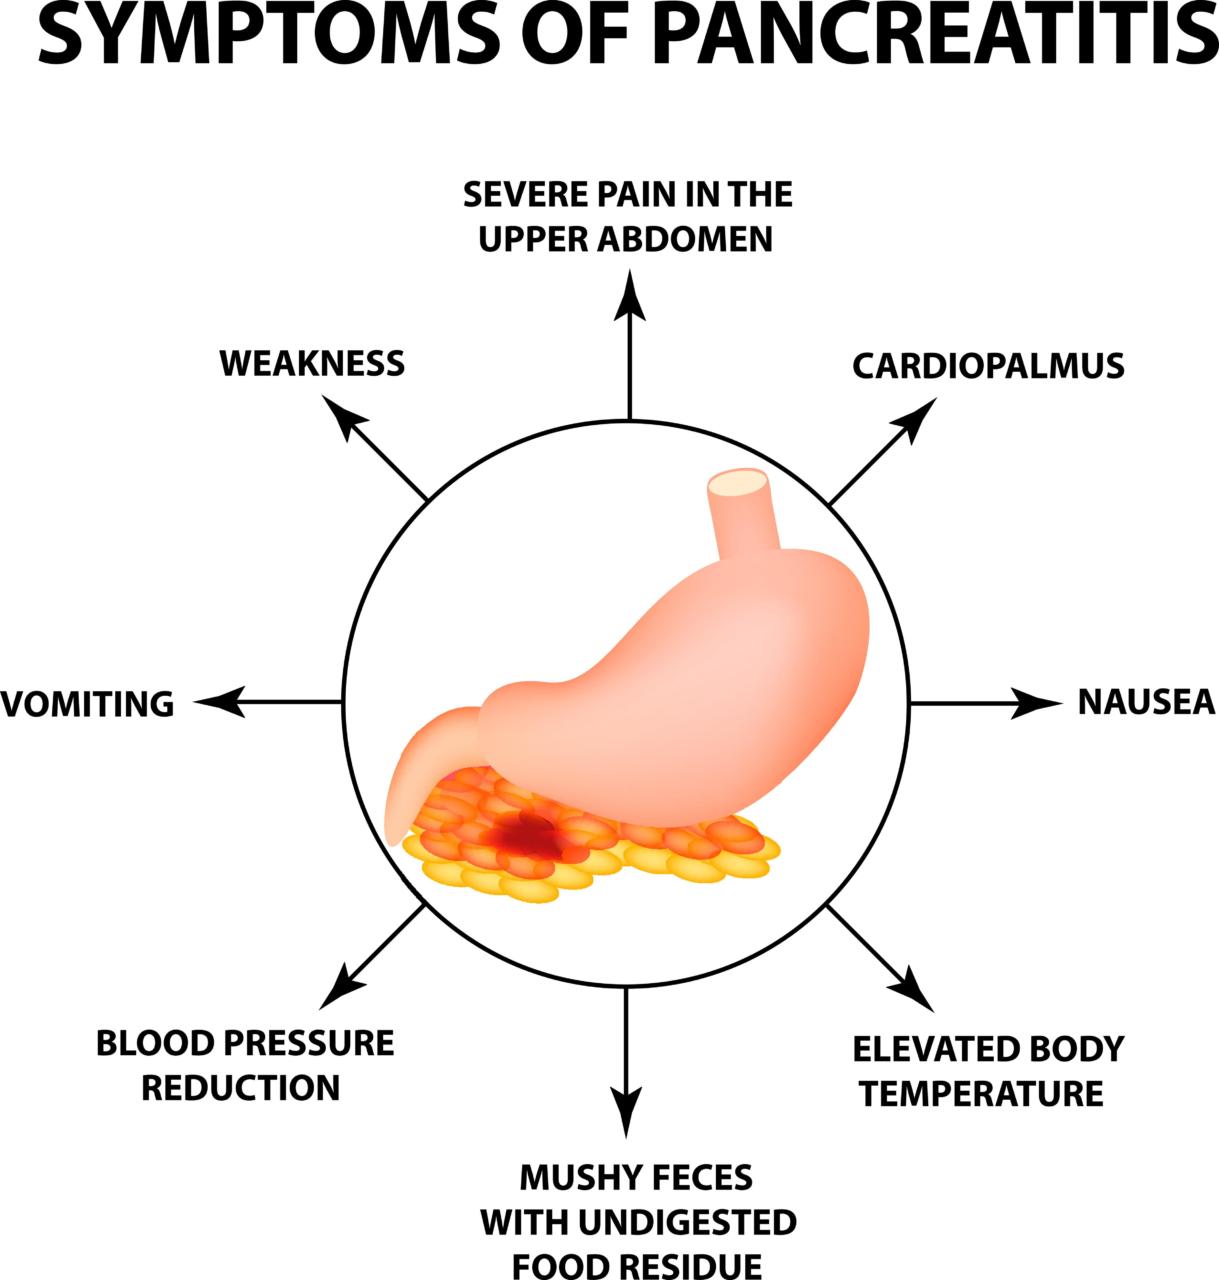 Can I Drink Alcohol After Acute Pancreatitis?